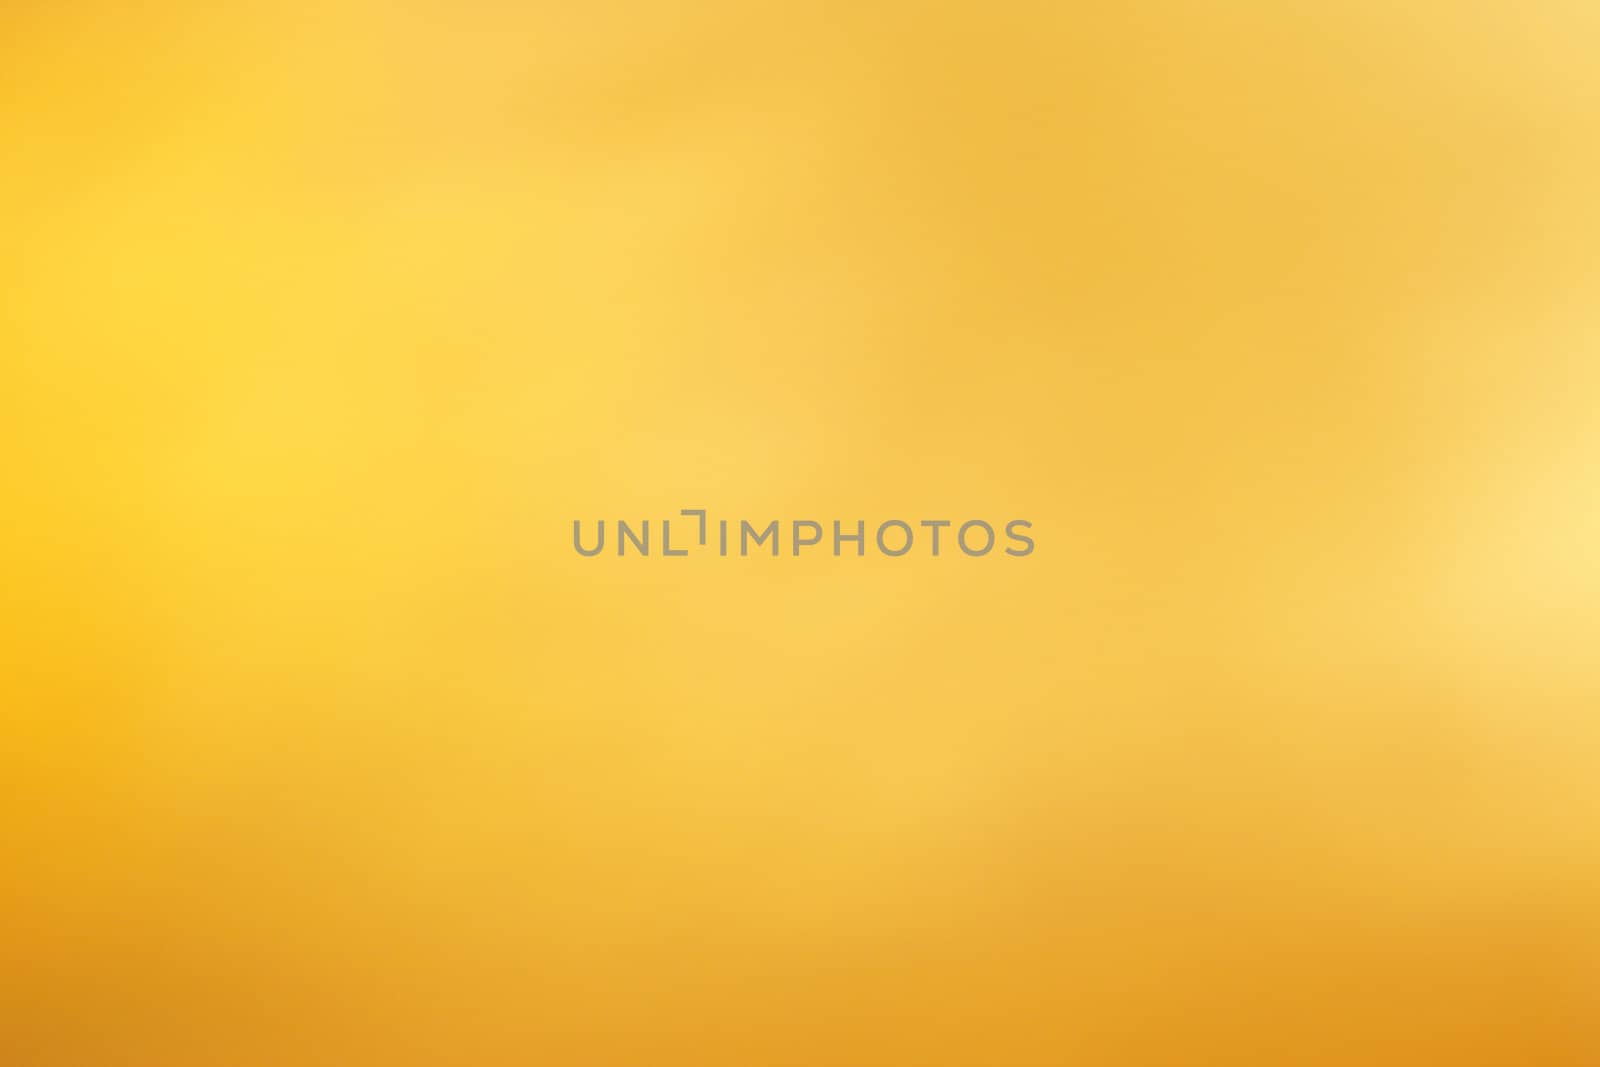 Gold shiny background with variating hues. by jarenwicklund